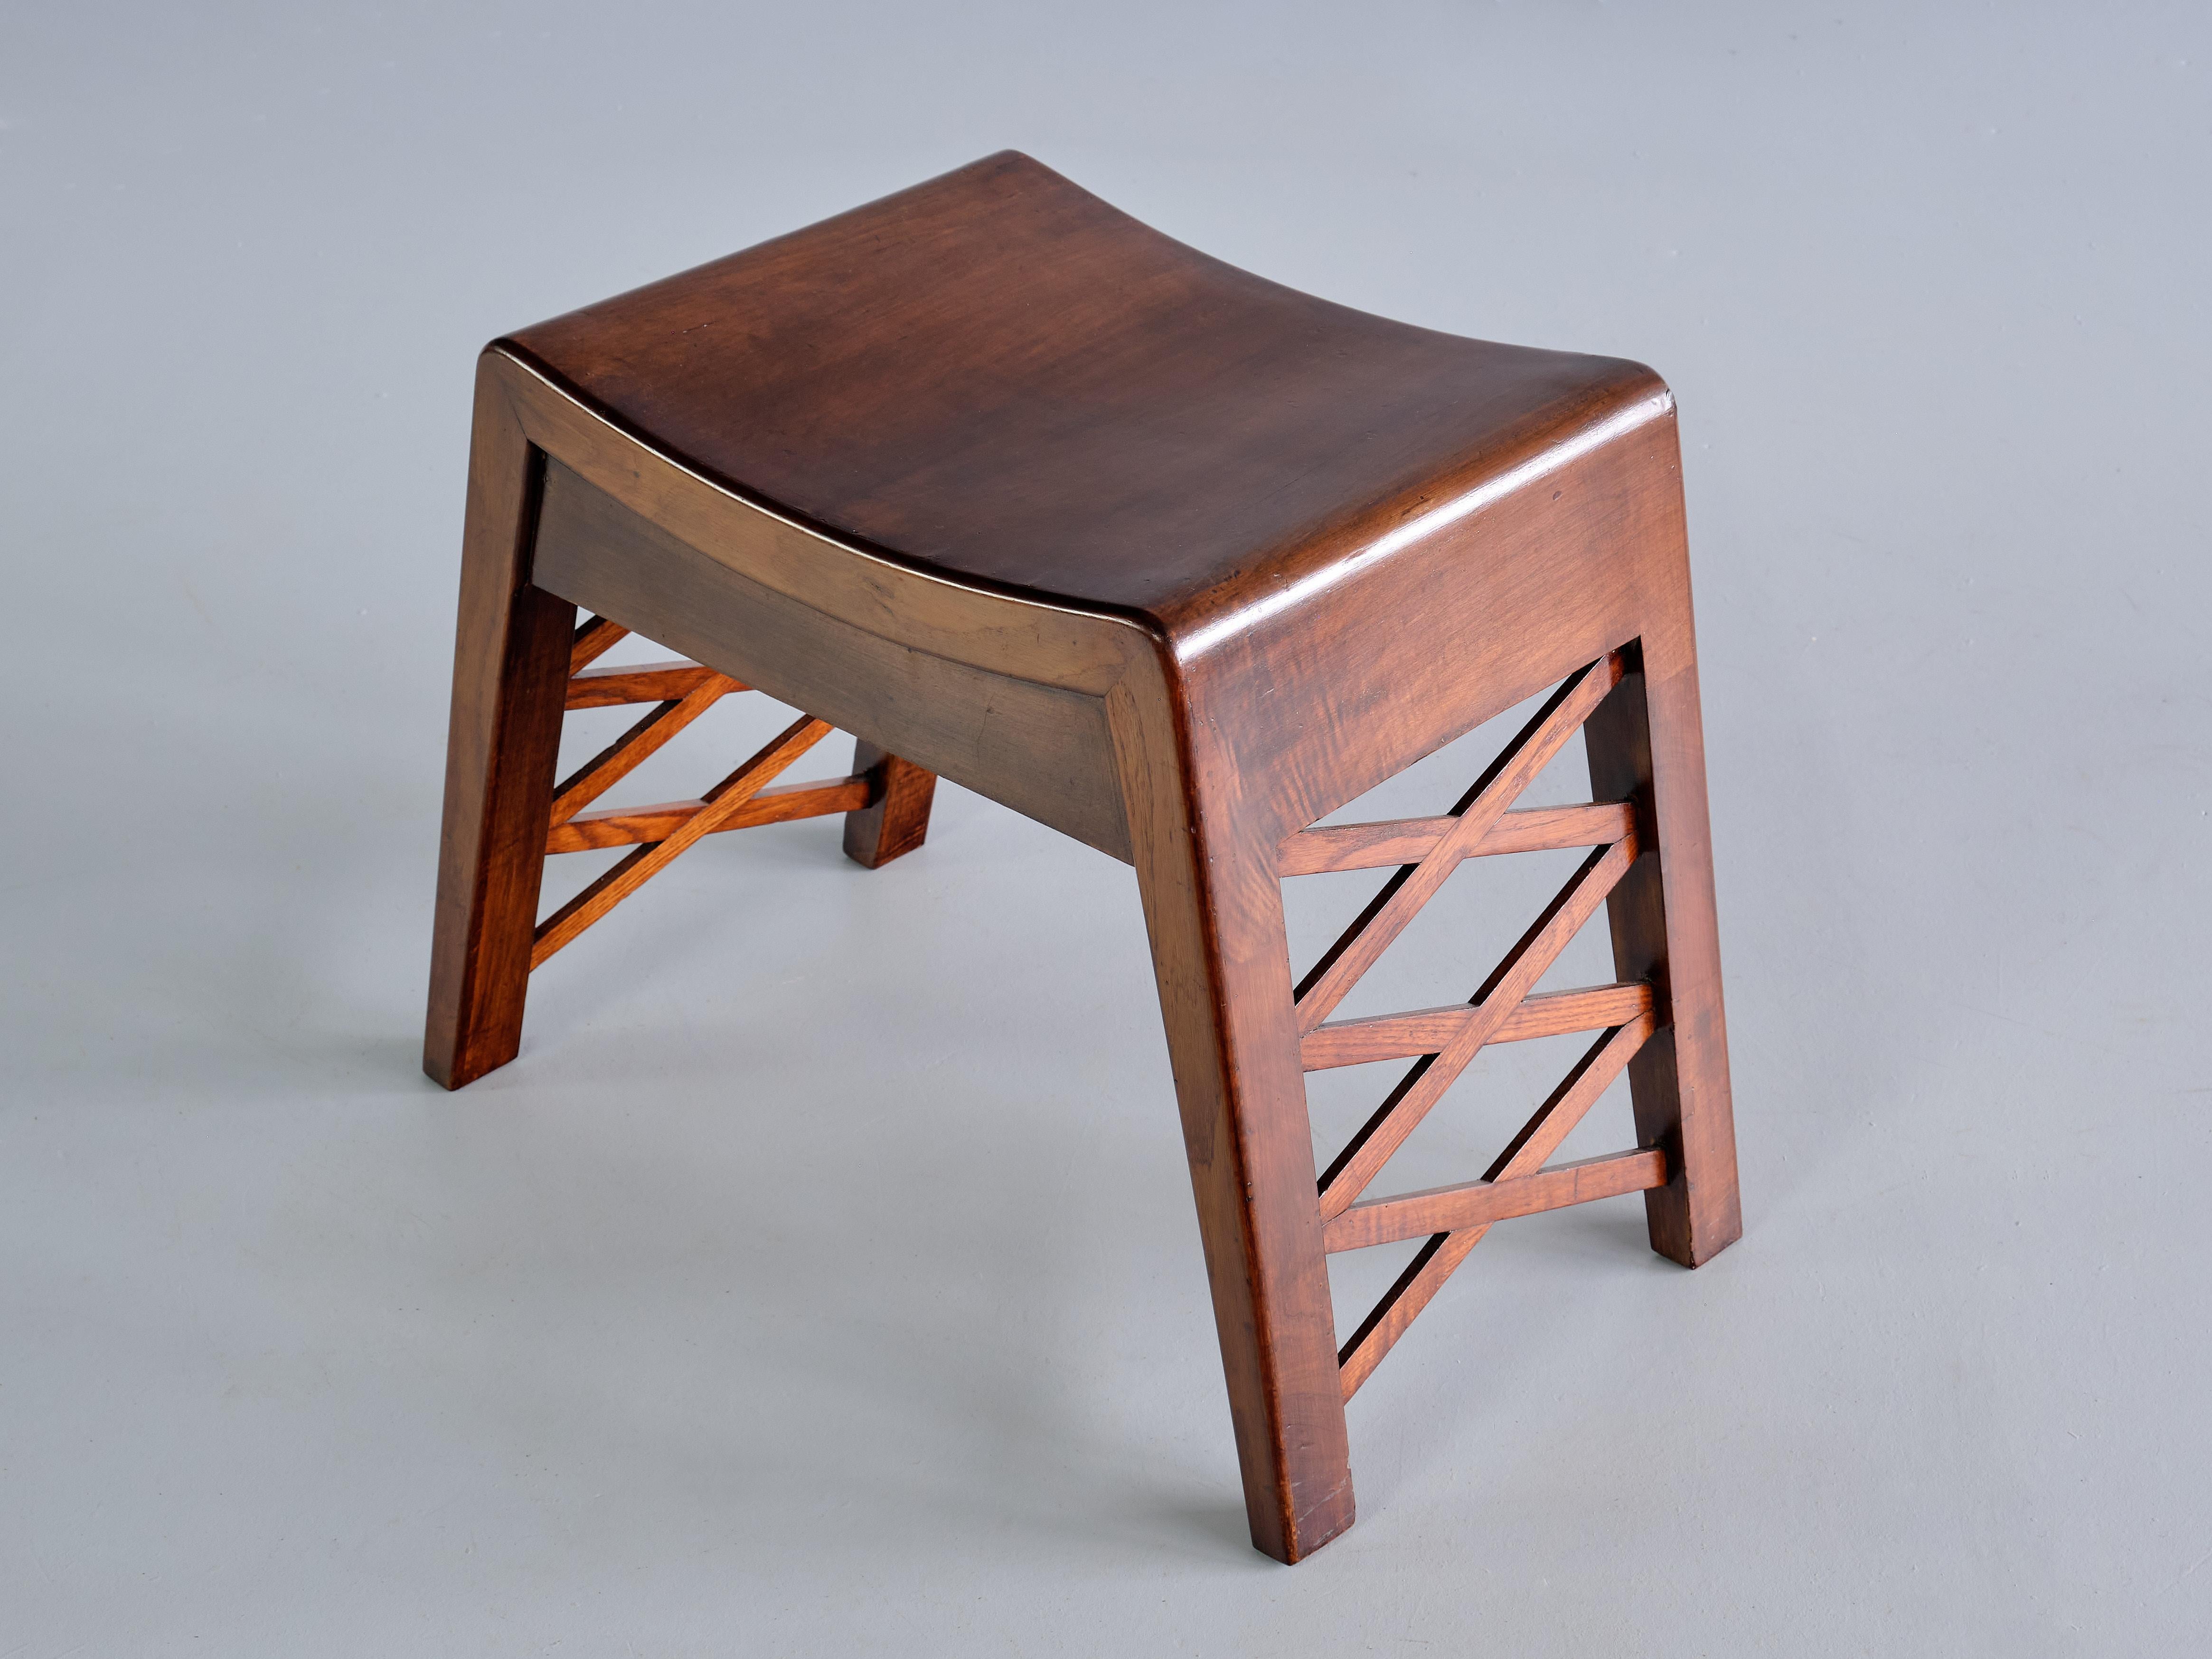 Piero Portaluppi Attributed Pair of Stools in Chestnut Wood, Italy, Late 1930s For Sale 6